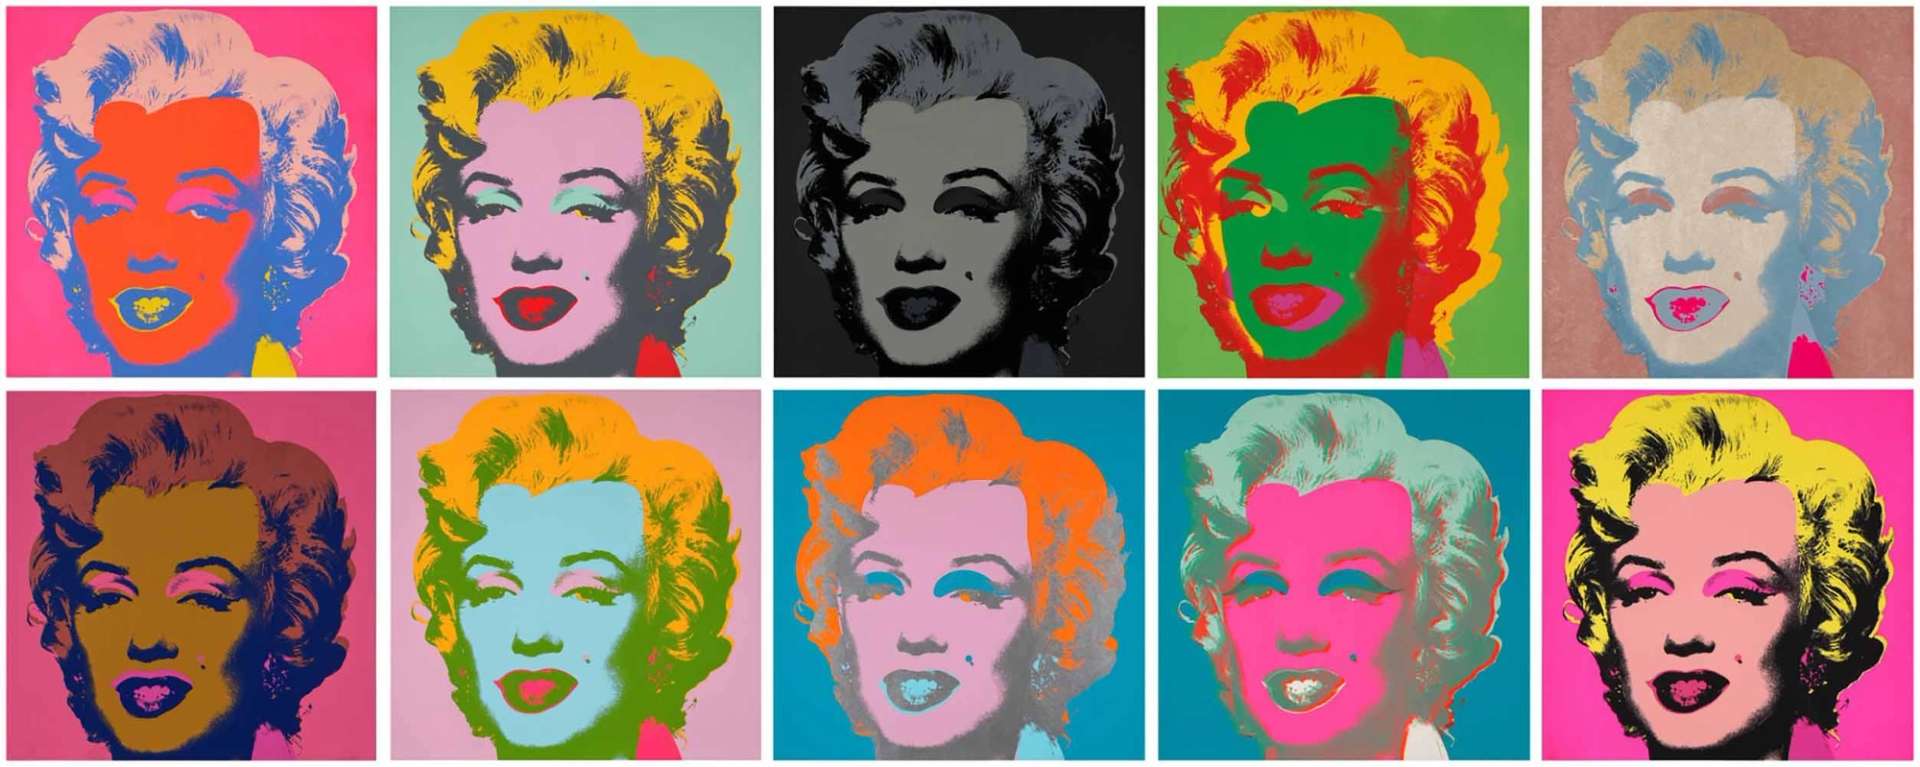 A complete set of Andy Warhol's portraits of actress Marilyn Monroe, in various bright block colour-ways.